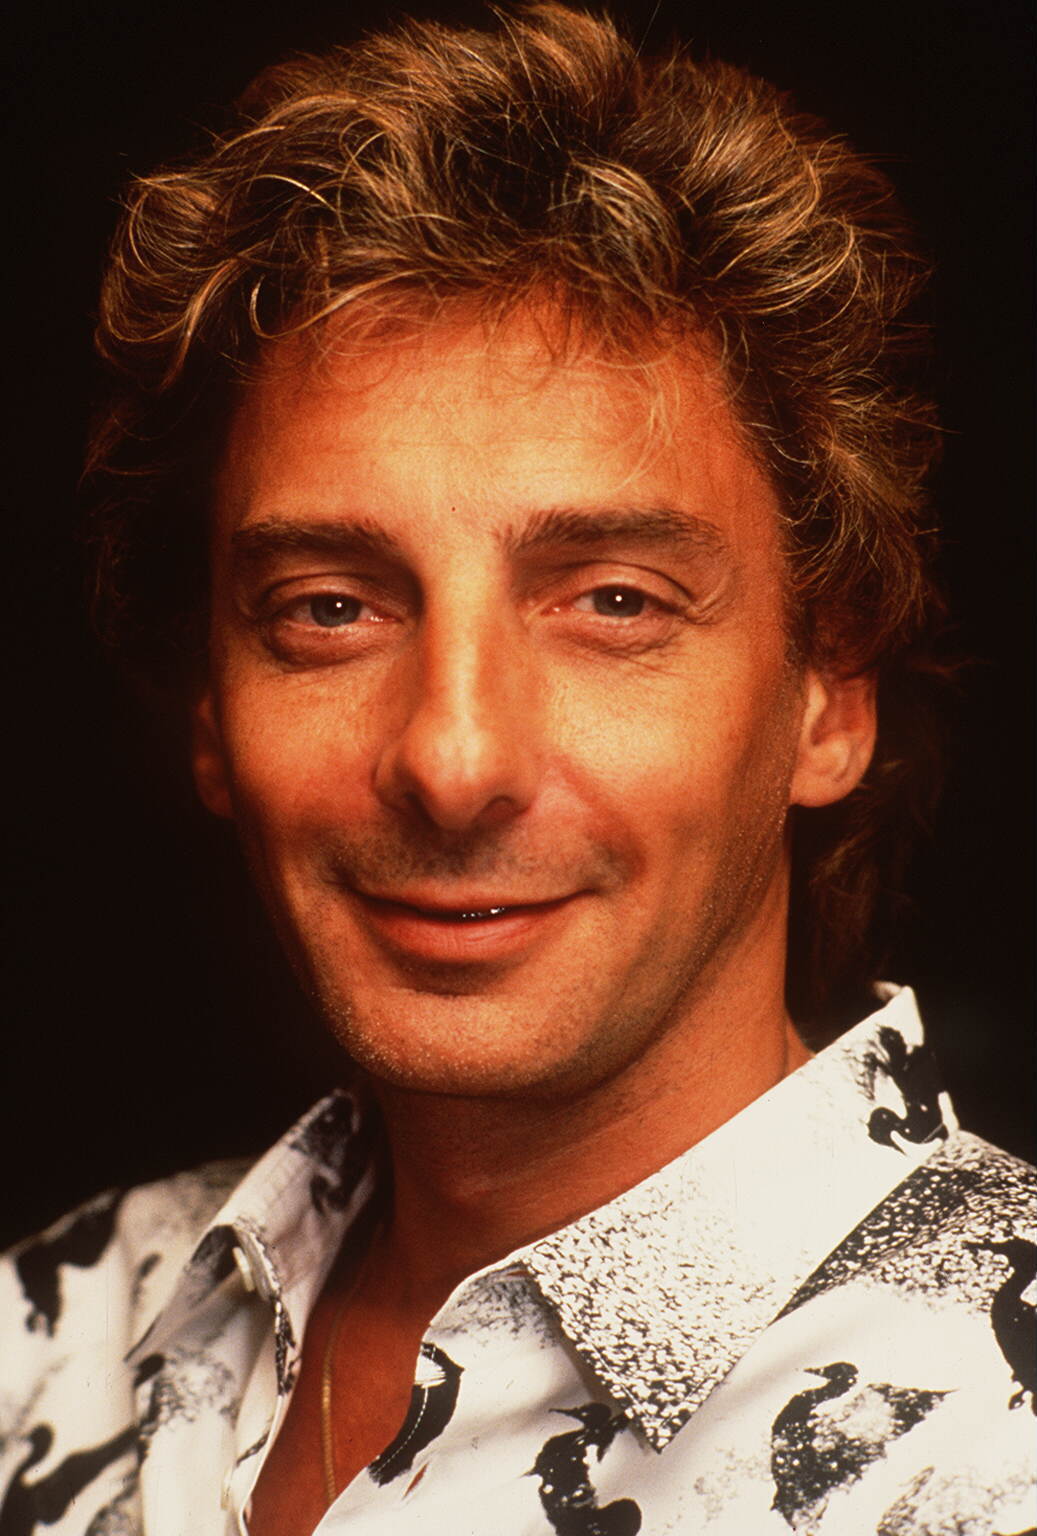 barry manilow - photo #2